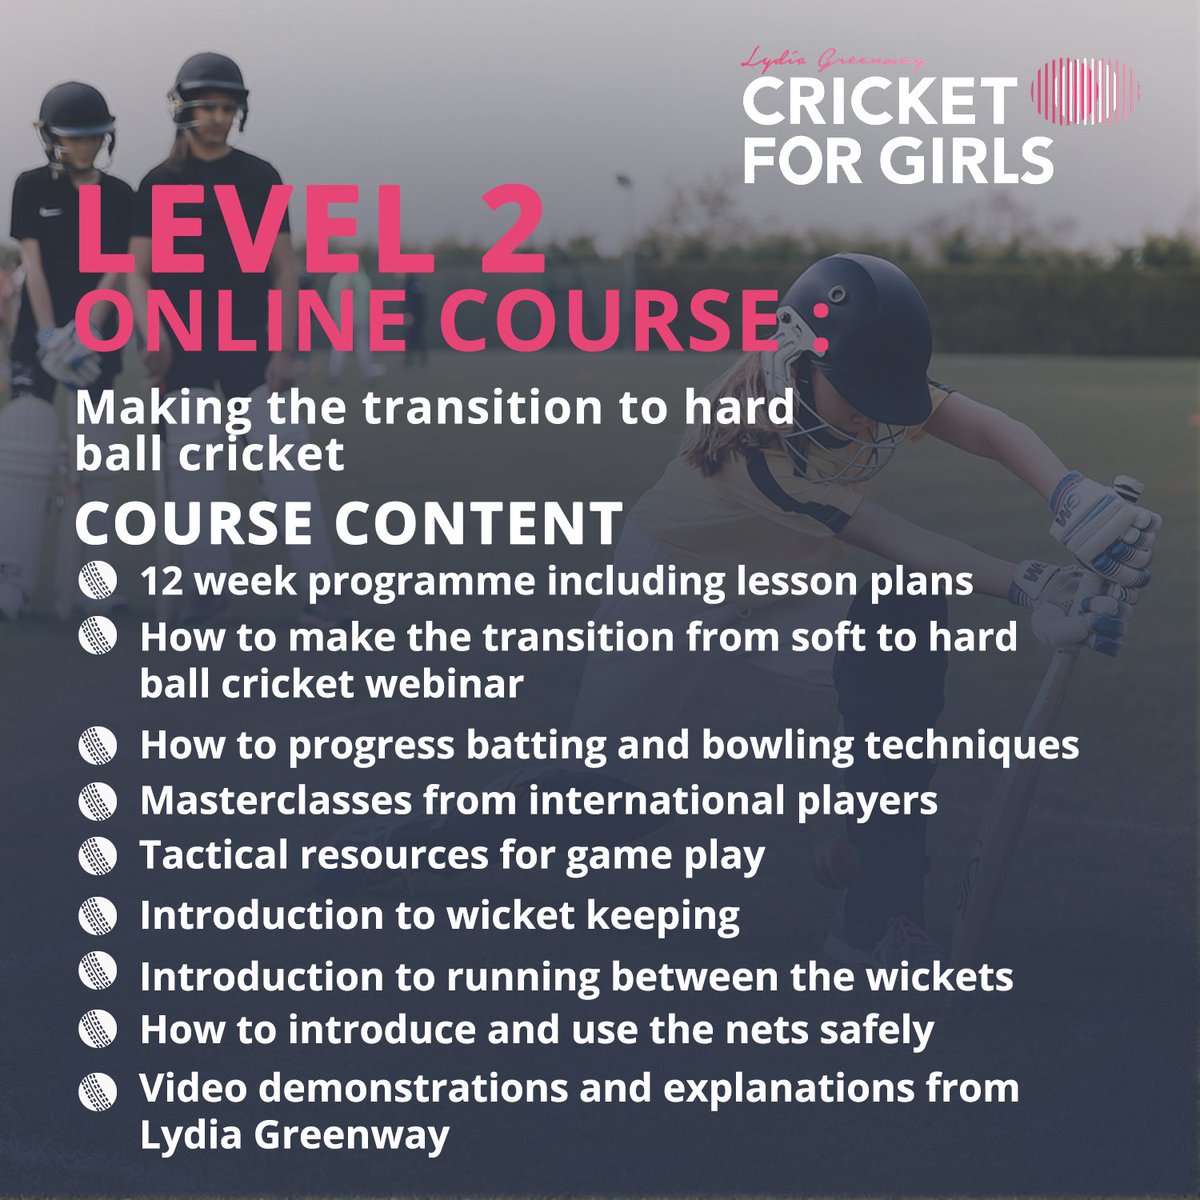 🏏 Cricket for Girls Level 2 Online Course! 🌟 ✅ Instant Access 📚 Flexible Learning 🏏 Perfect for teachers and coaches guiding players transitioning to hardball cricket. 🌐 Designed and delivered by Lydia Greenway 🔗 Enroll now: 👉 cricketforgirls.com/products/crick…